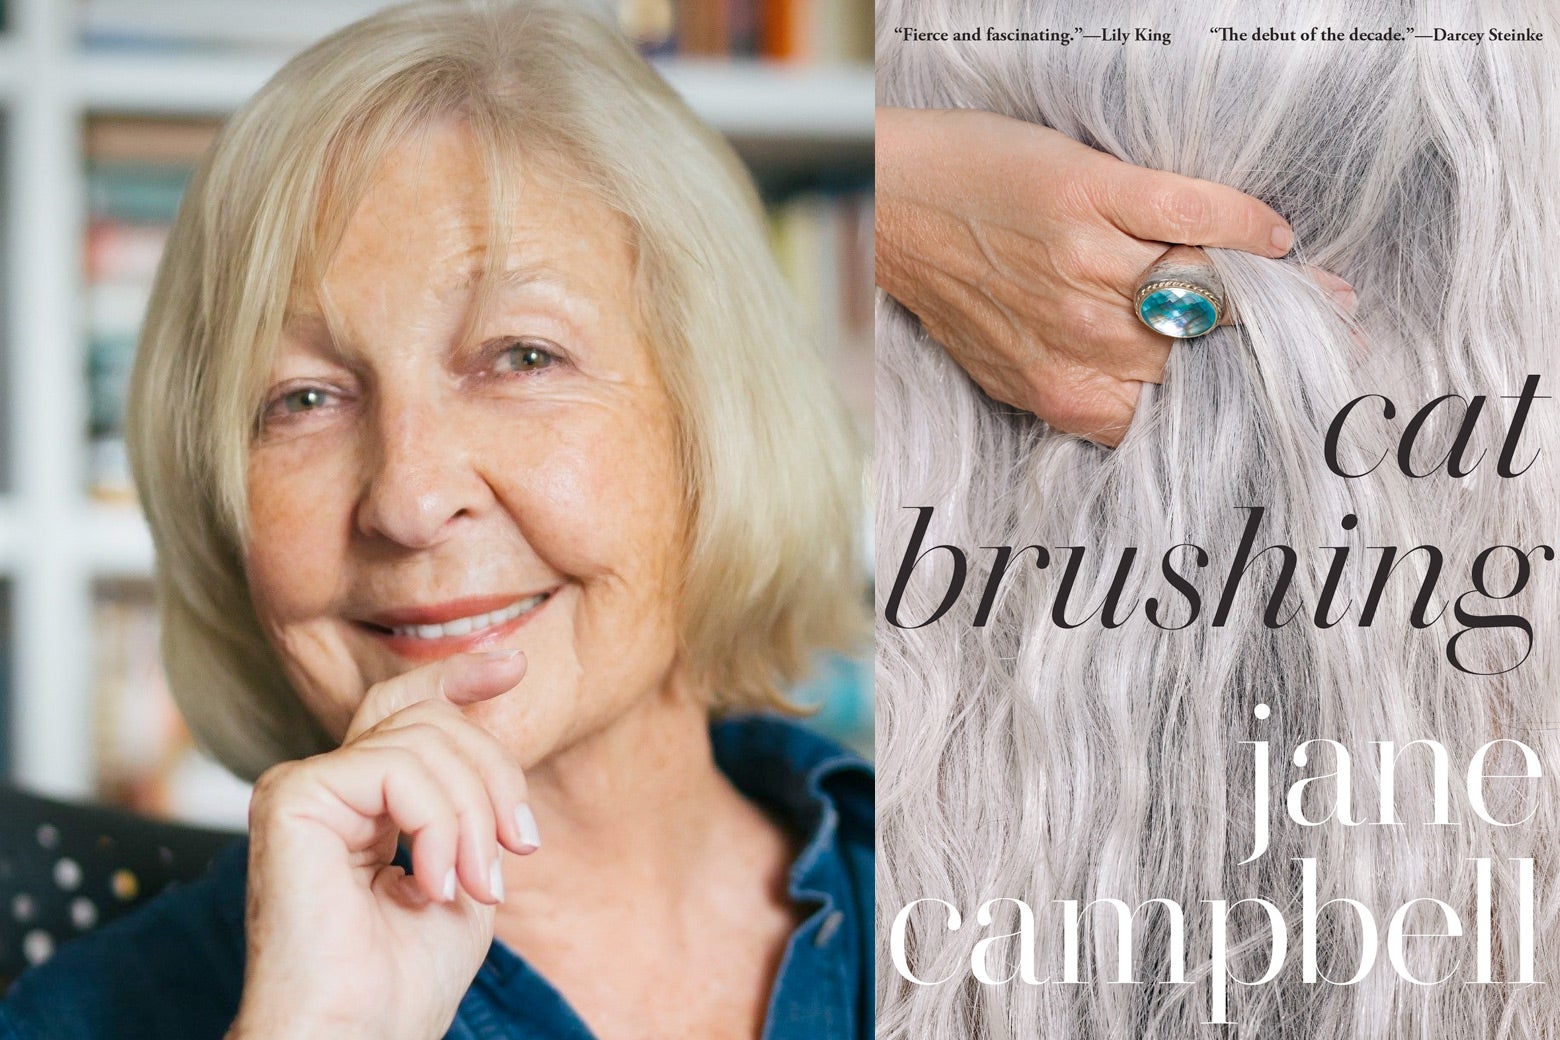 On the left, a charming-looking older woman with gray-blonde hair smiles at the camera, her right hand raised to her chin. On the right, the cover of her book Cat Brushing, showing a somewhat wrinkly hand wearing a big bright blue stone on a ring running its fingers through thick gray hair